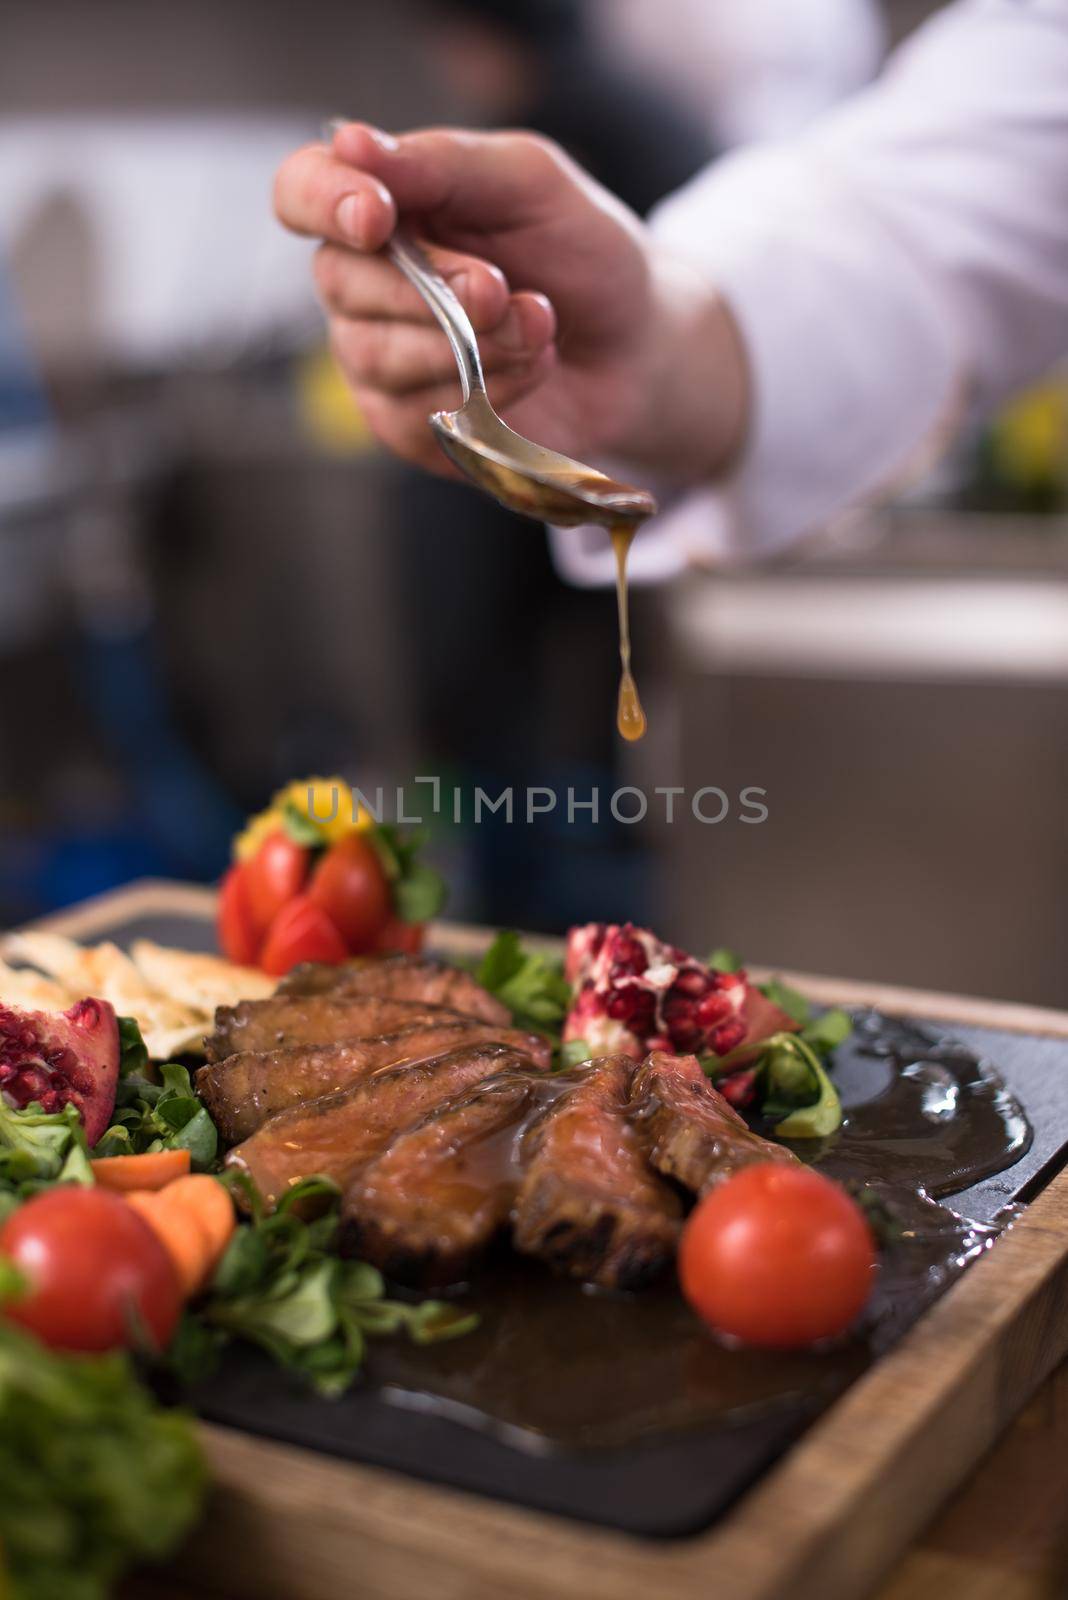 Chef hand finishing steak meat plate with Finally dish dressing and almost ready to serve at the table